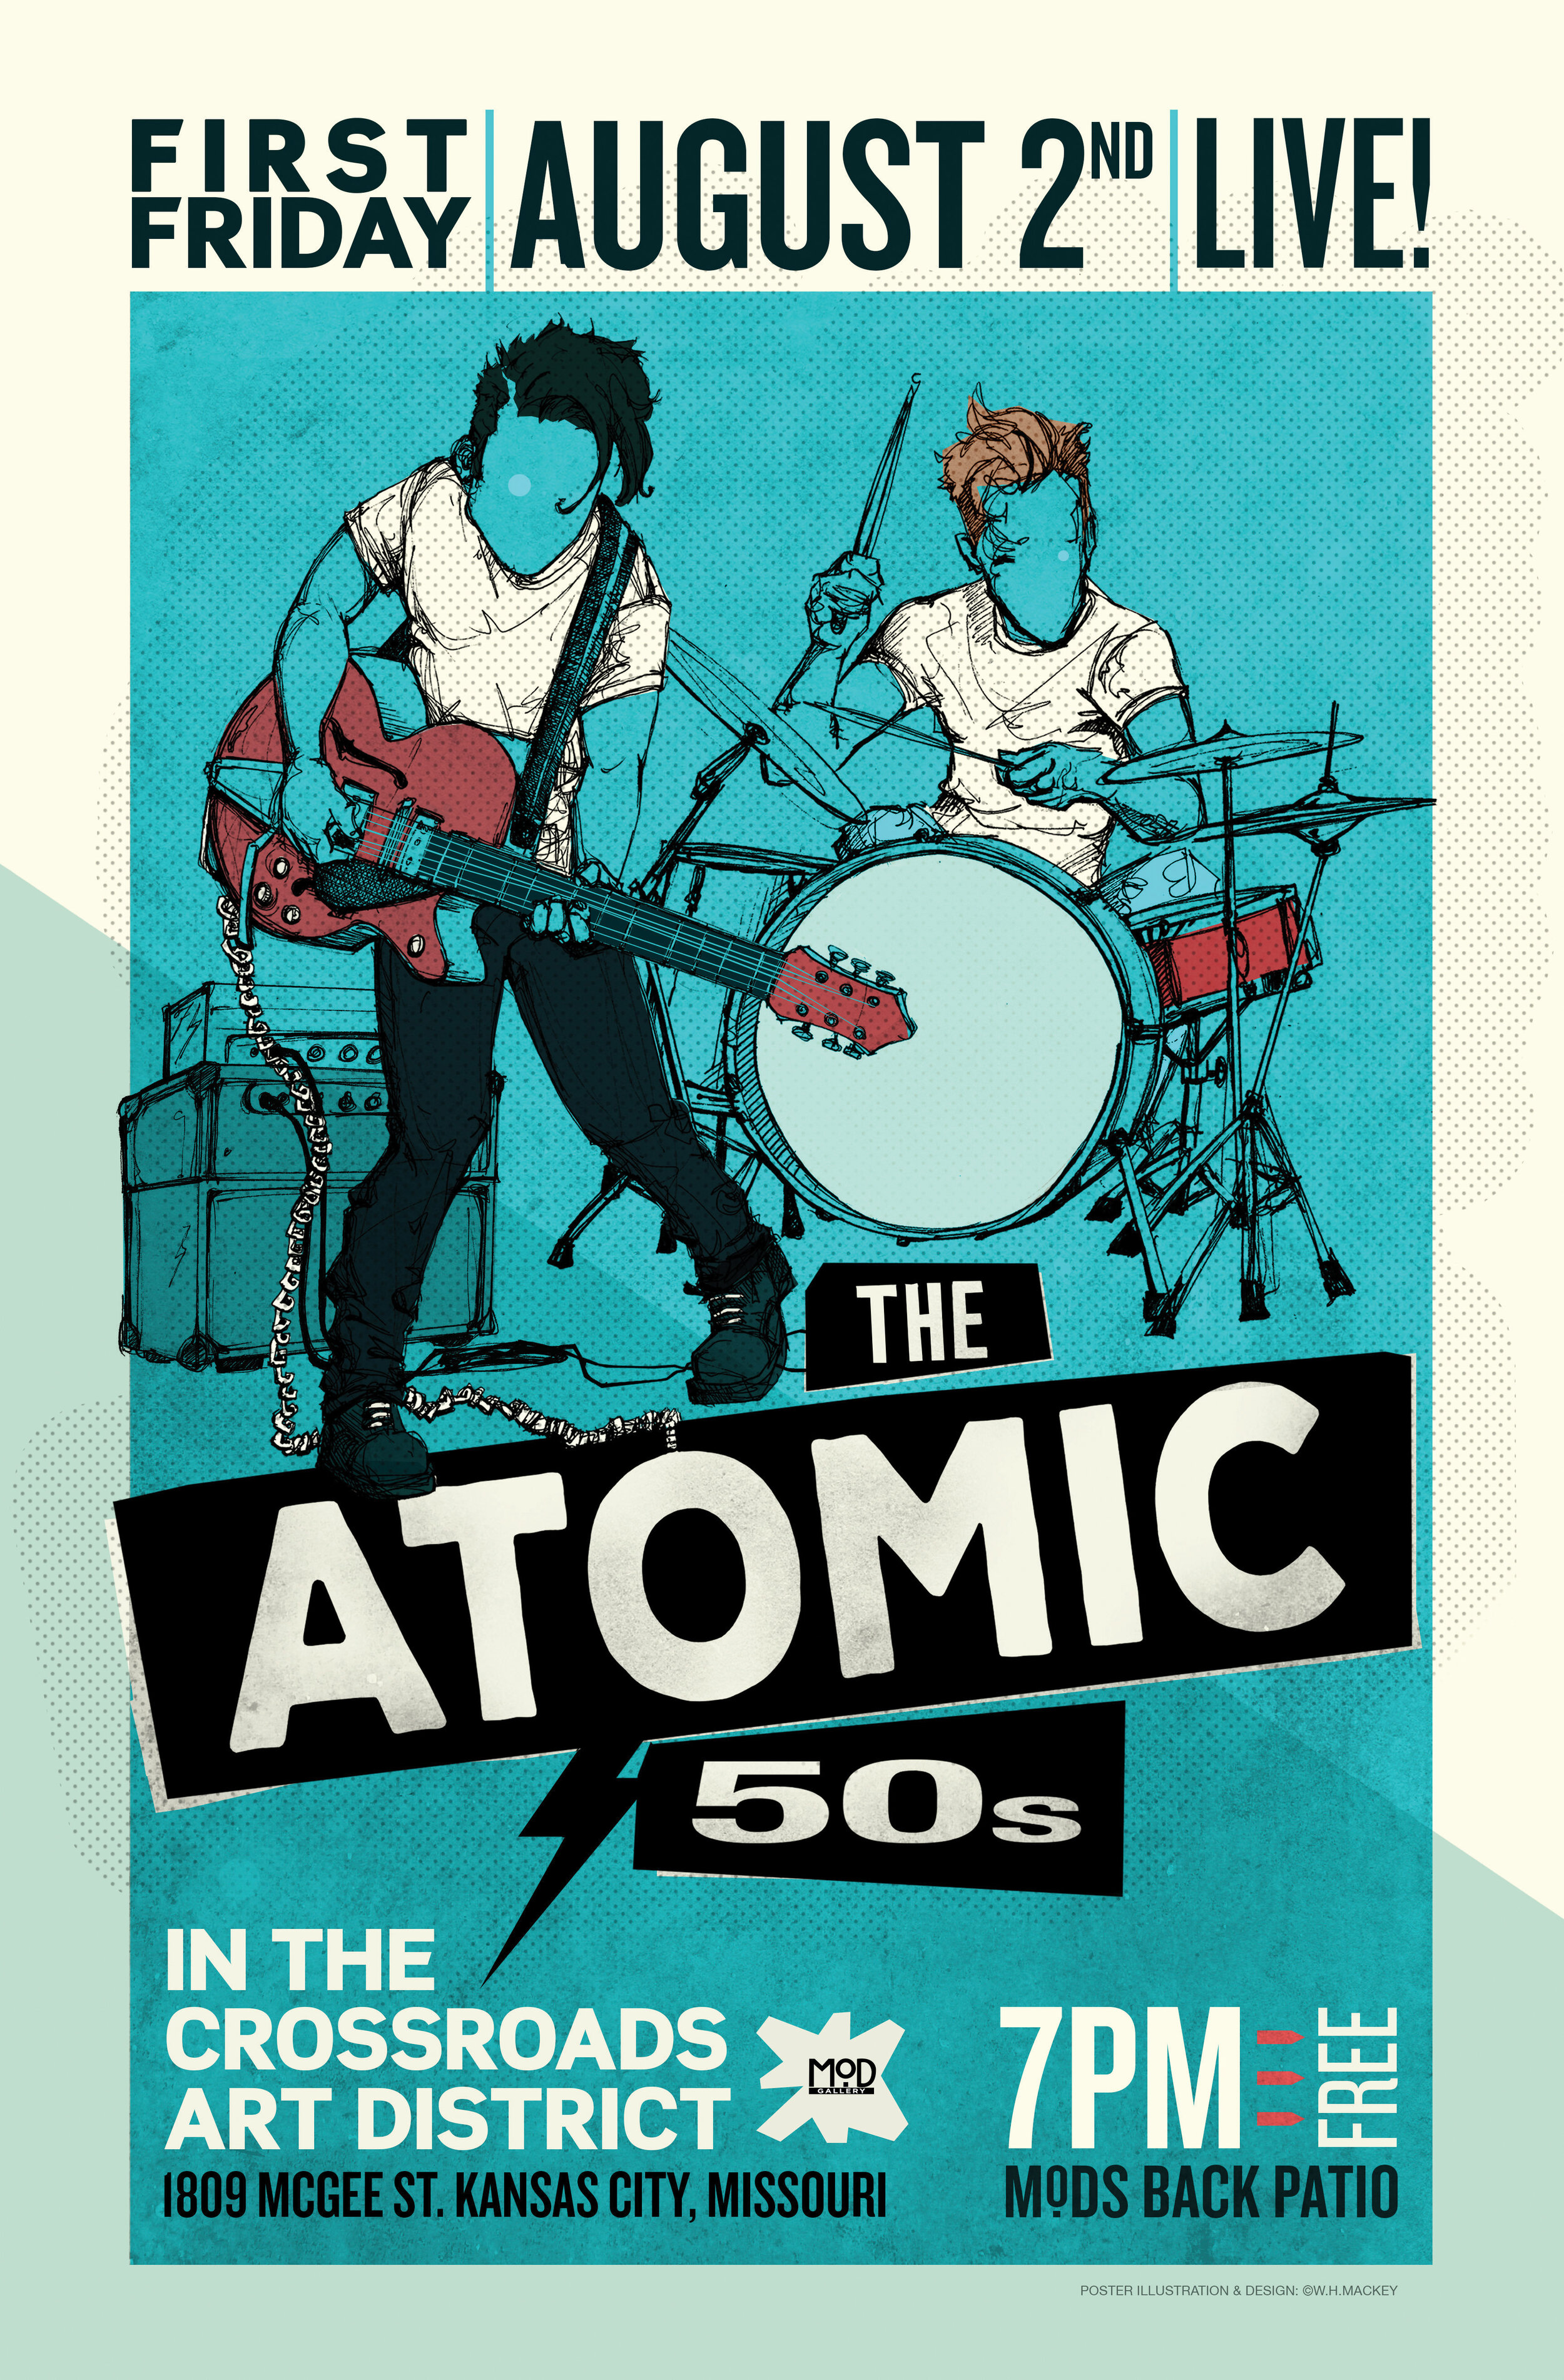 The Atomic '50s Show Poster